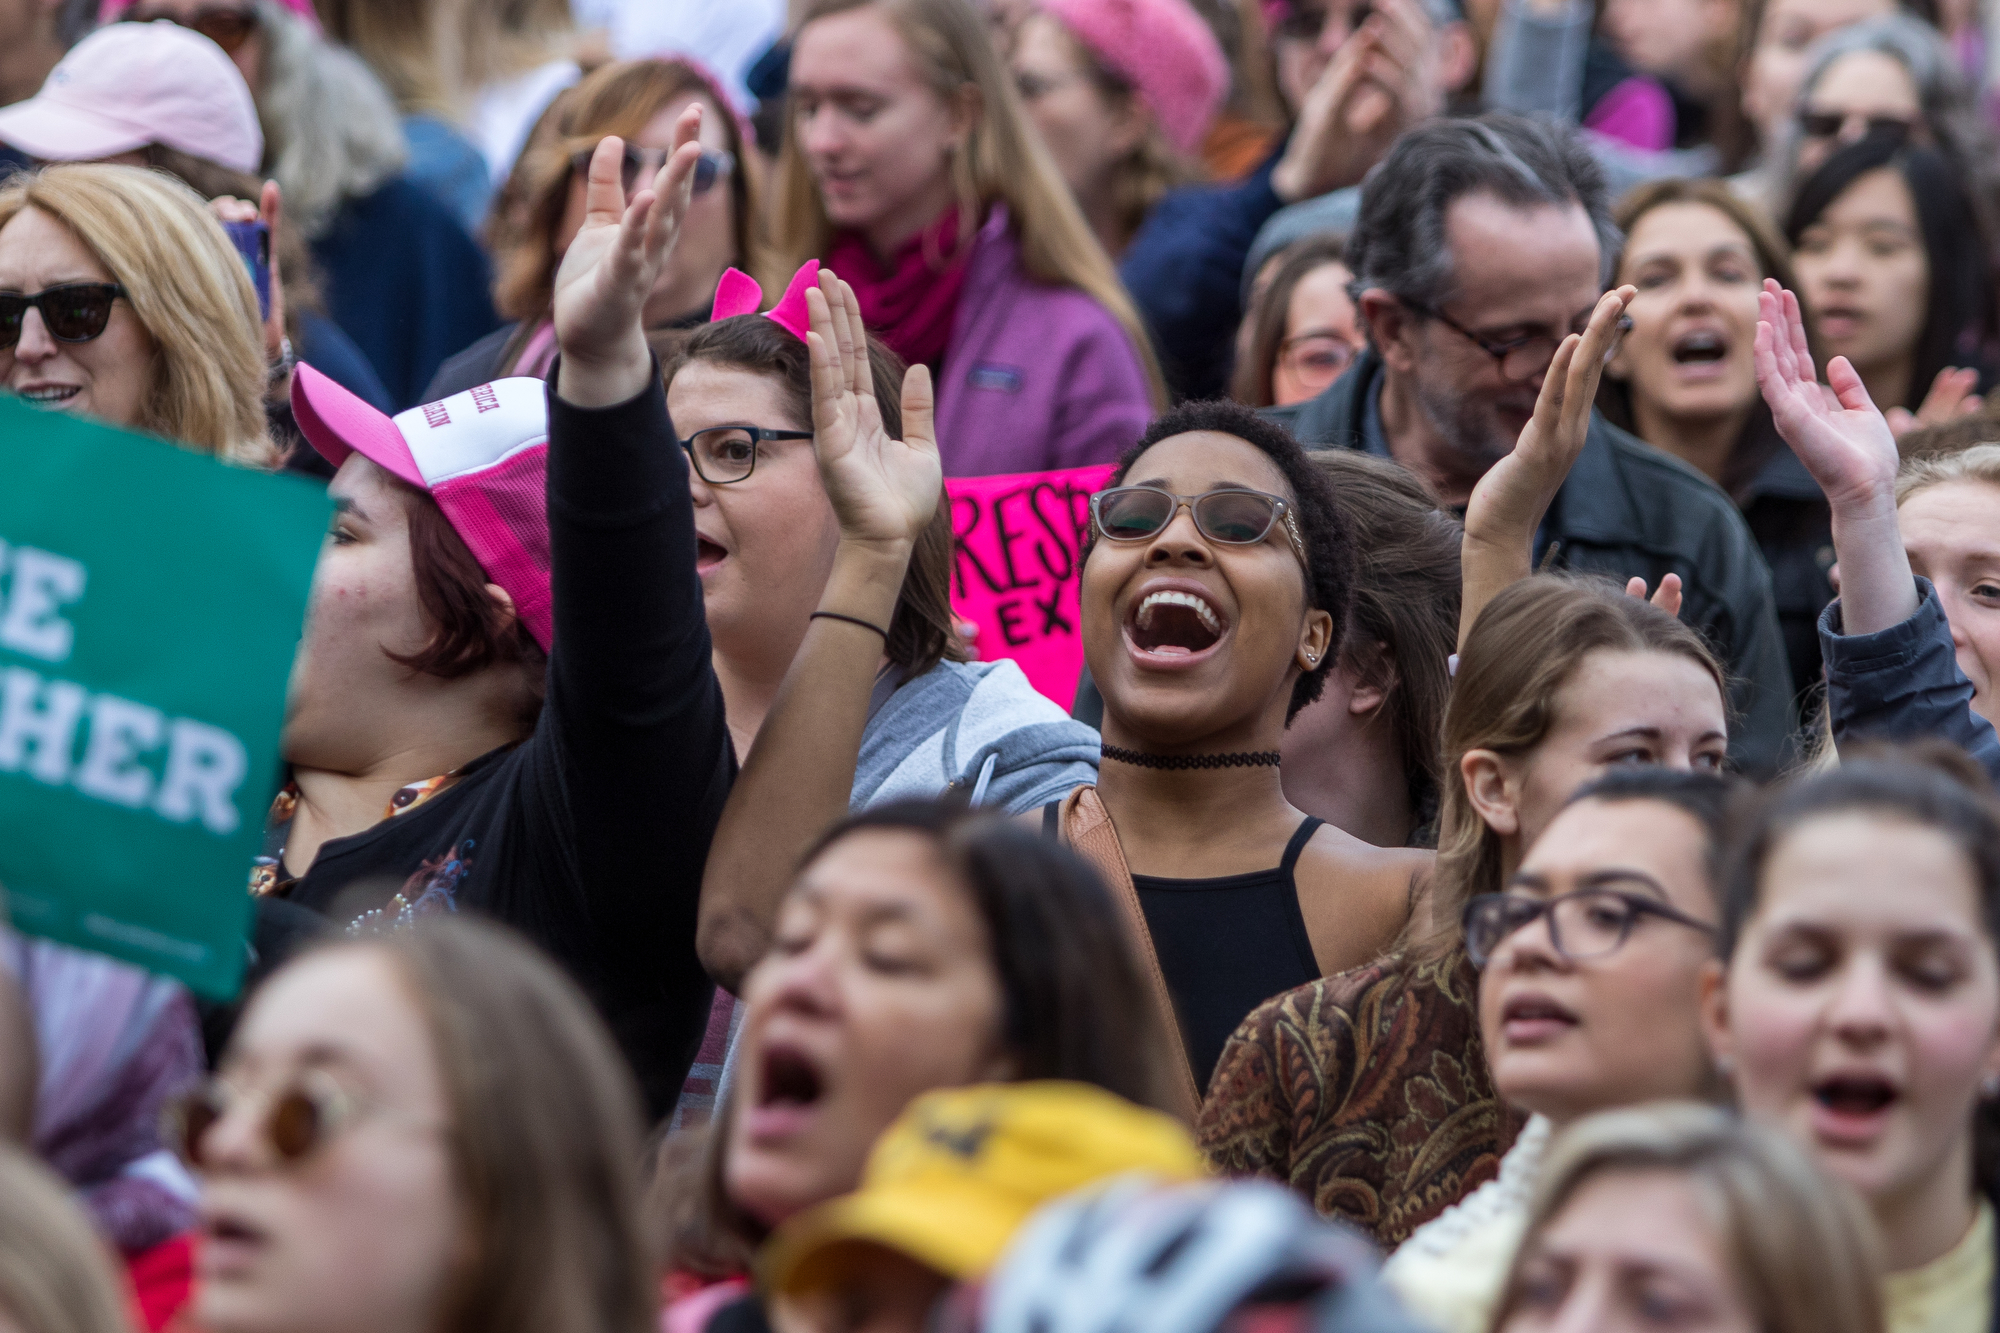  A woman sings at the Diag at the University of Michigan during the Women's March on Saturday, January 21, 2017.  The march was one of several throughout the country and drew over 6,000 people. Matt Weigand | The Ann Arbor News 